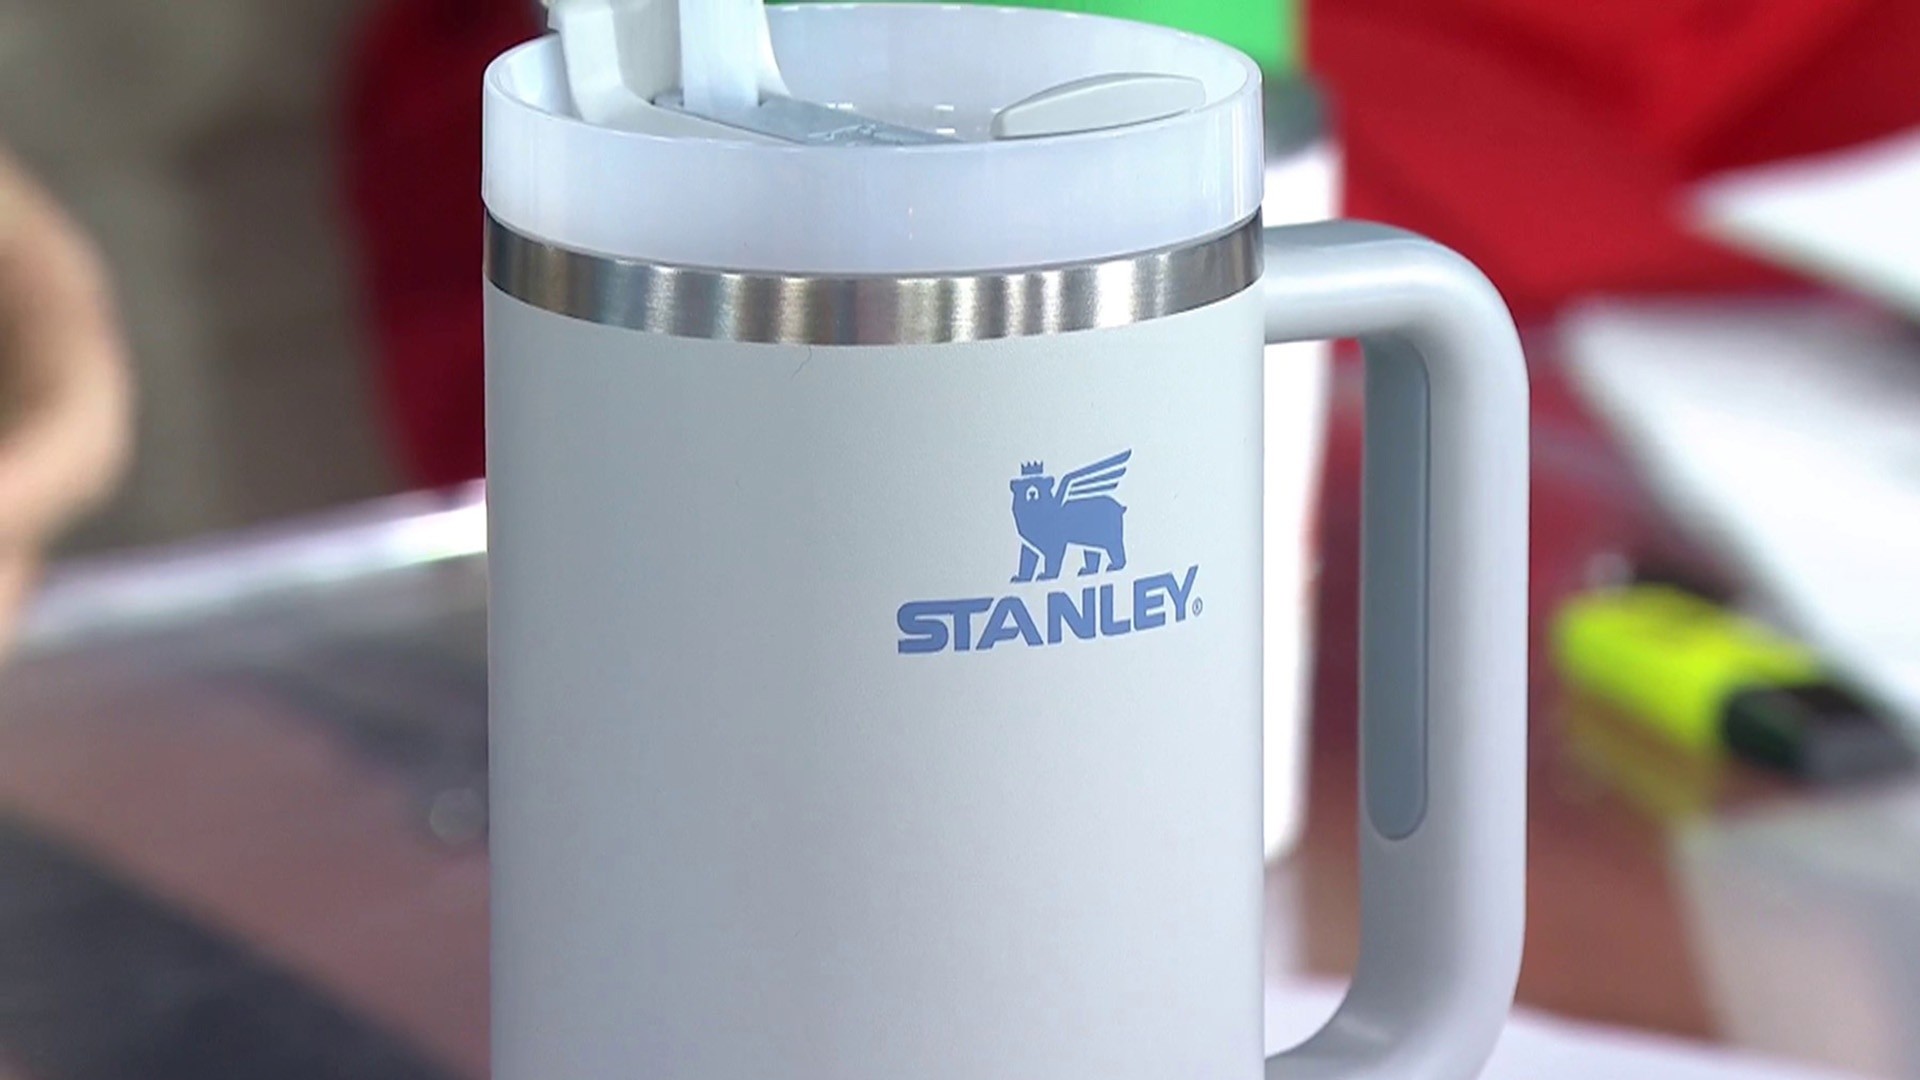 The Ultimate Stanley Cup Gift Guide For Your Tumbler-Obsessed Bestie